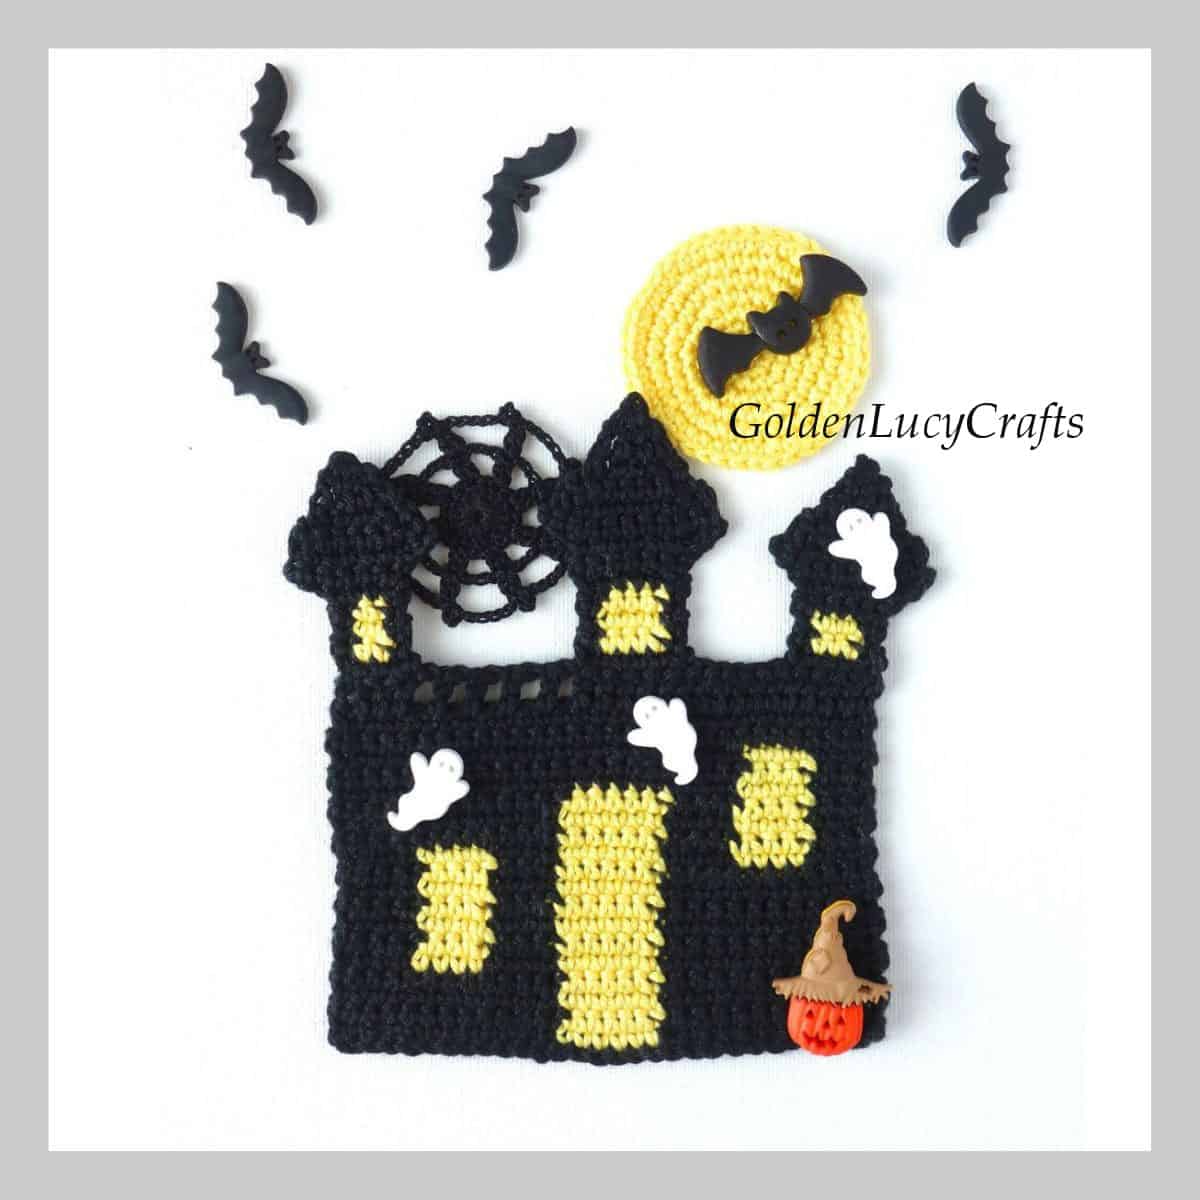 Crocheted haunted house applique.